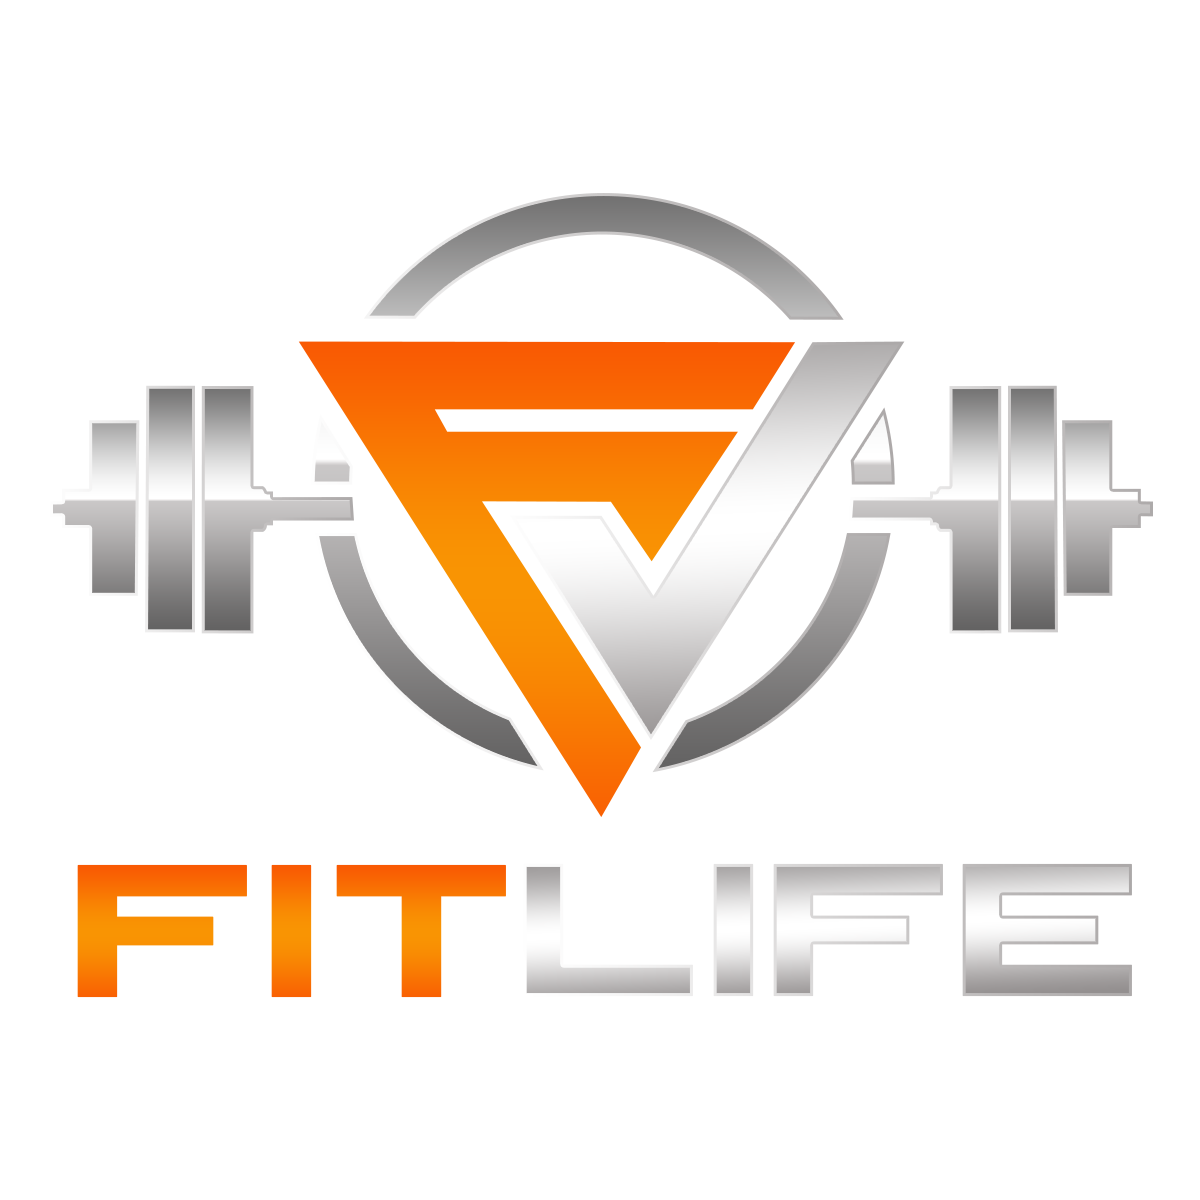 FitLife Gyms